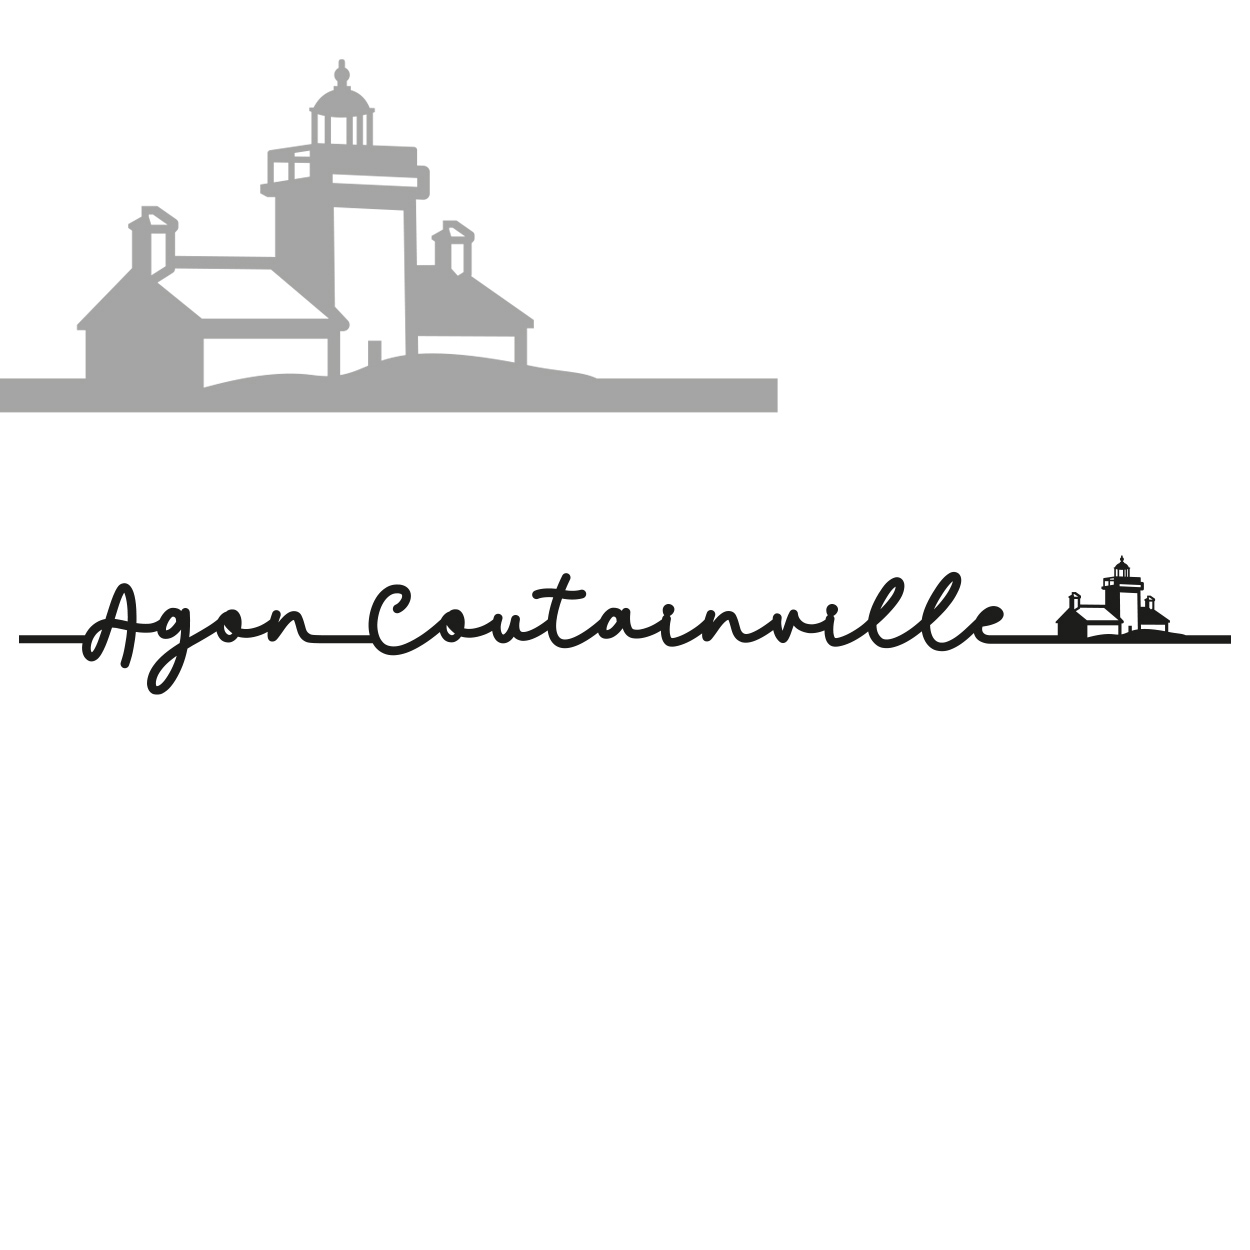 AGON COUTAINVILLE